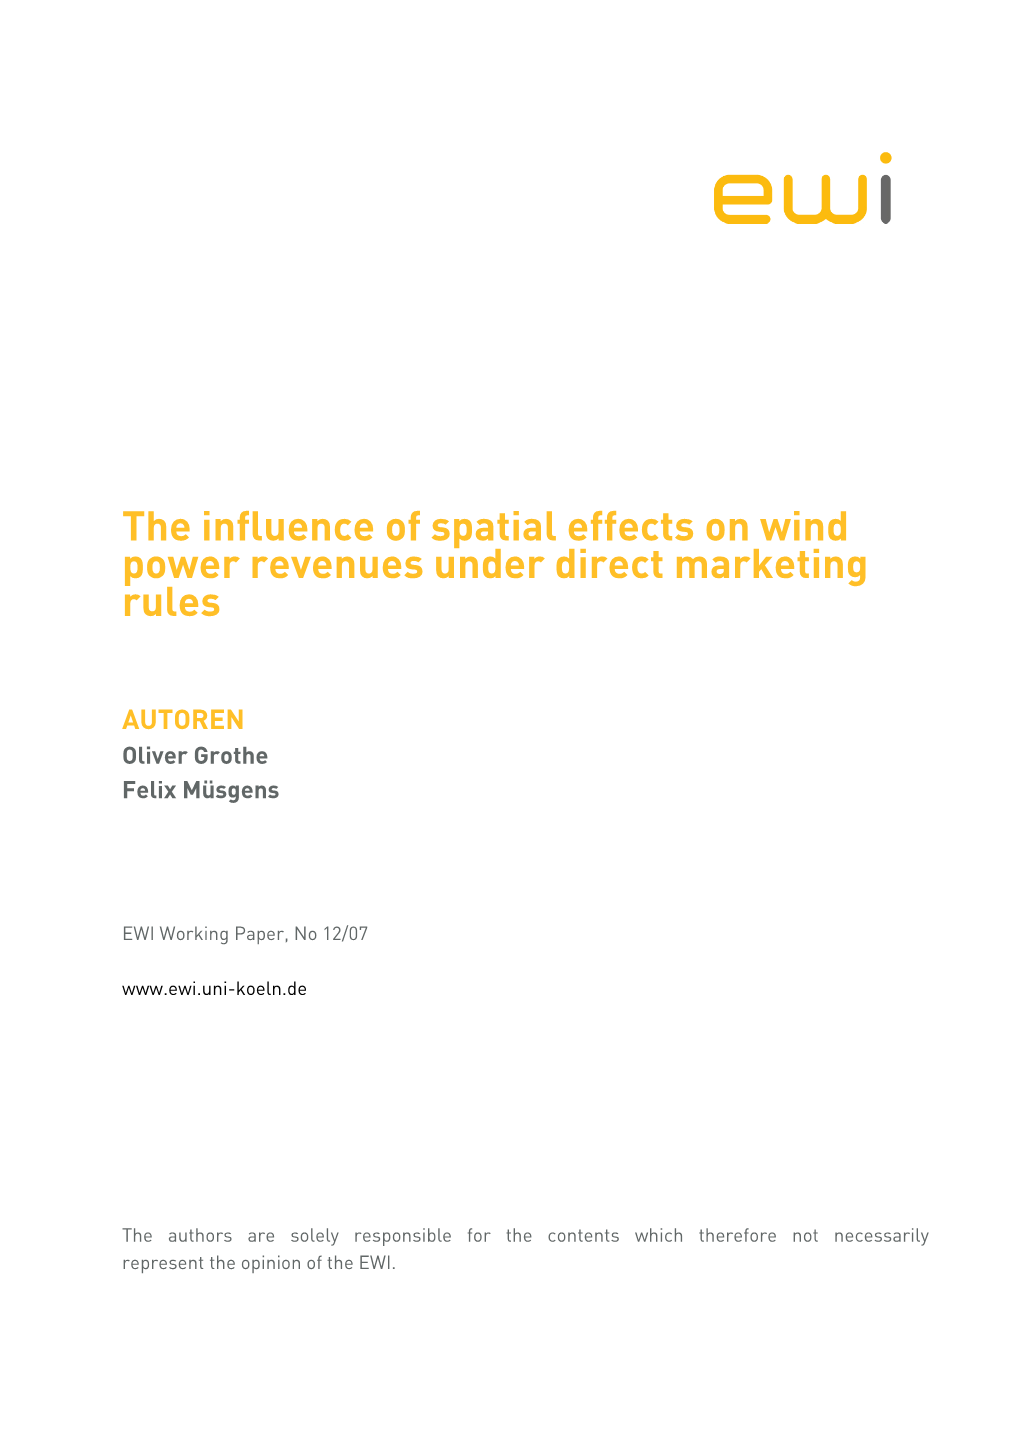 The Influence of Spatial Effects on Wind Power Revenues